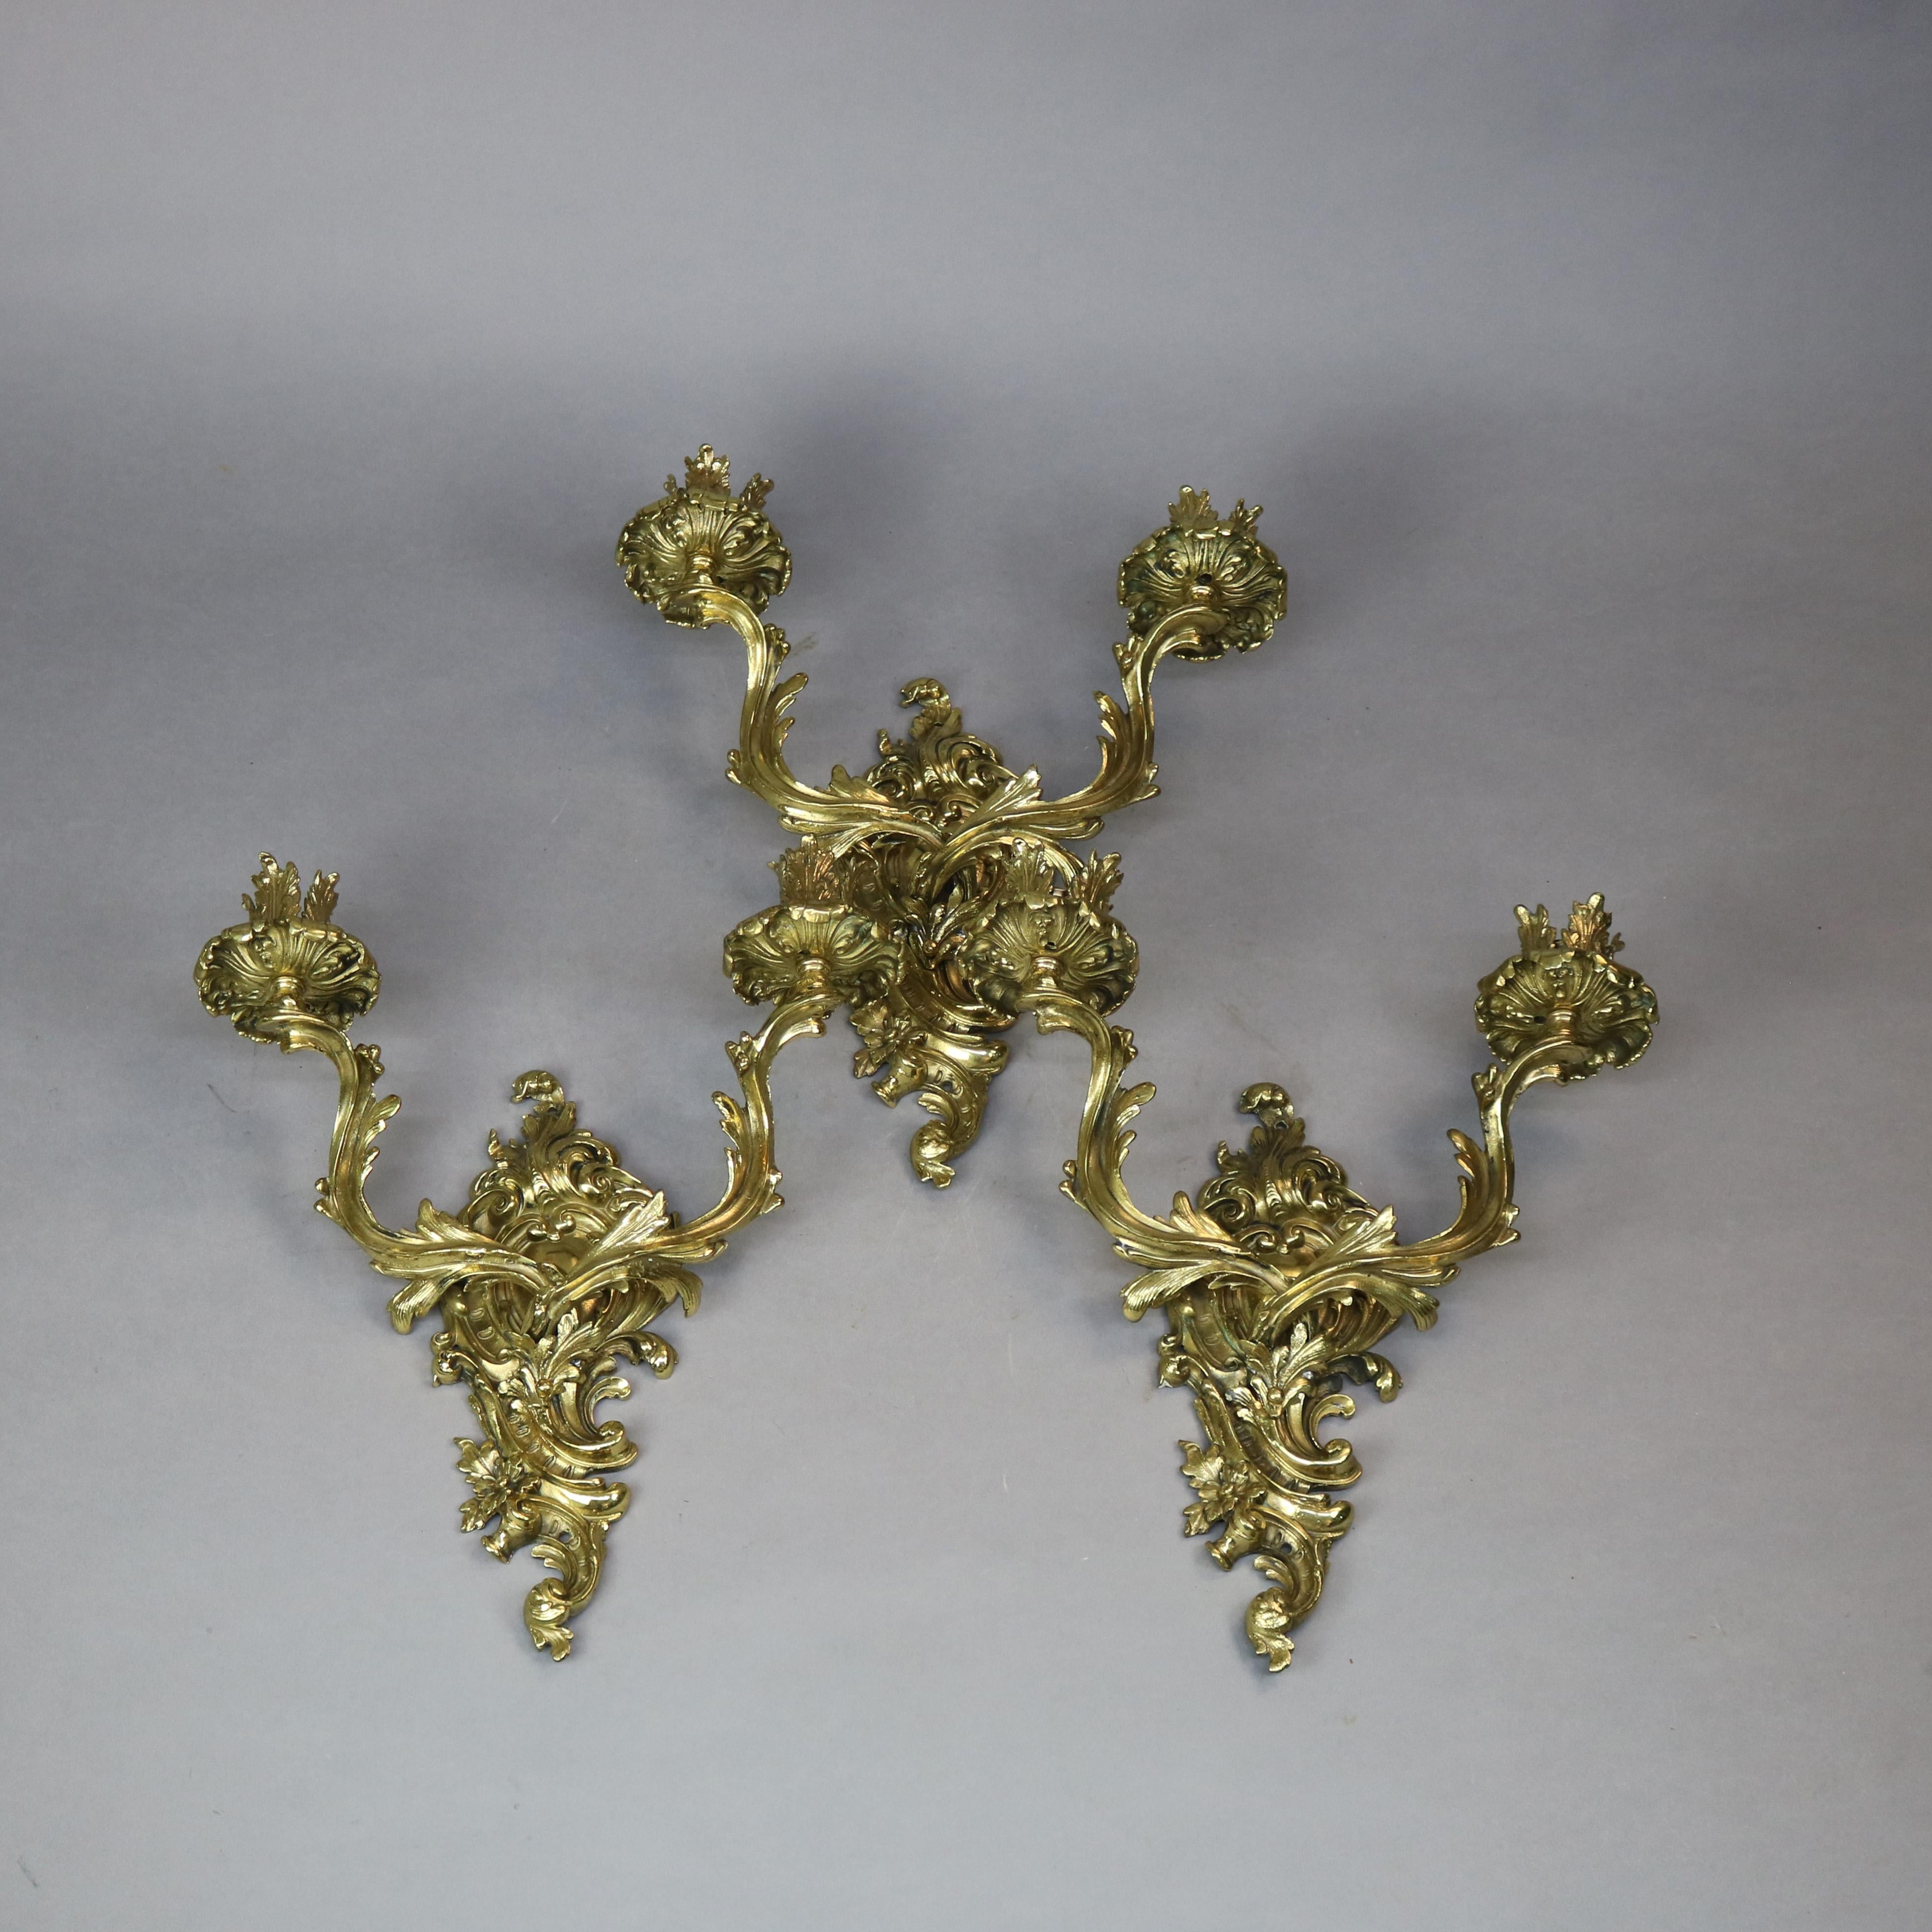 An antique and early set of three French Rococo gas wall sconces offer gilt bronze castings in foliate form, each having two scroll arms terminating in candle sockets, c1870.
No label
Measures: 17